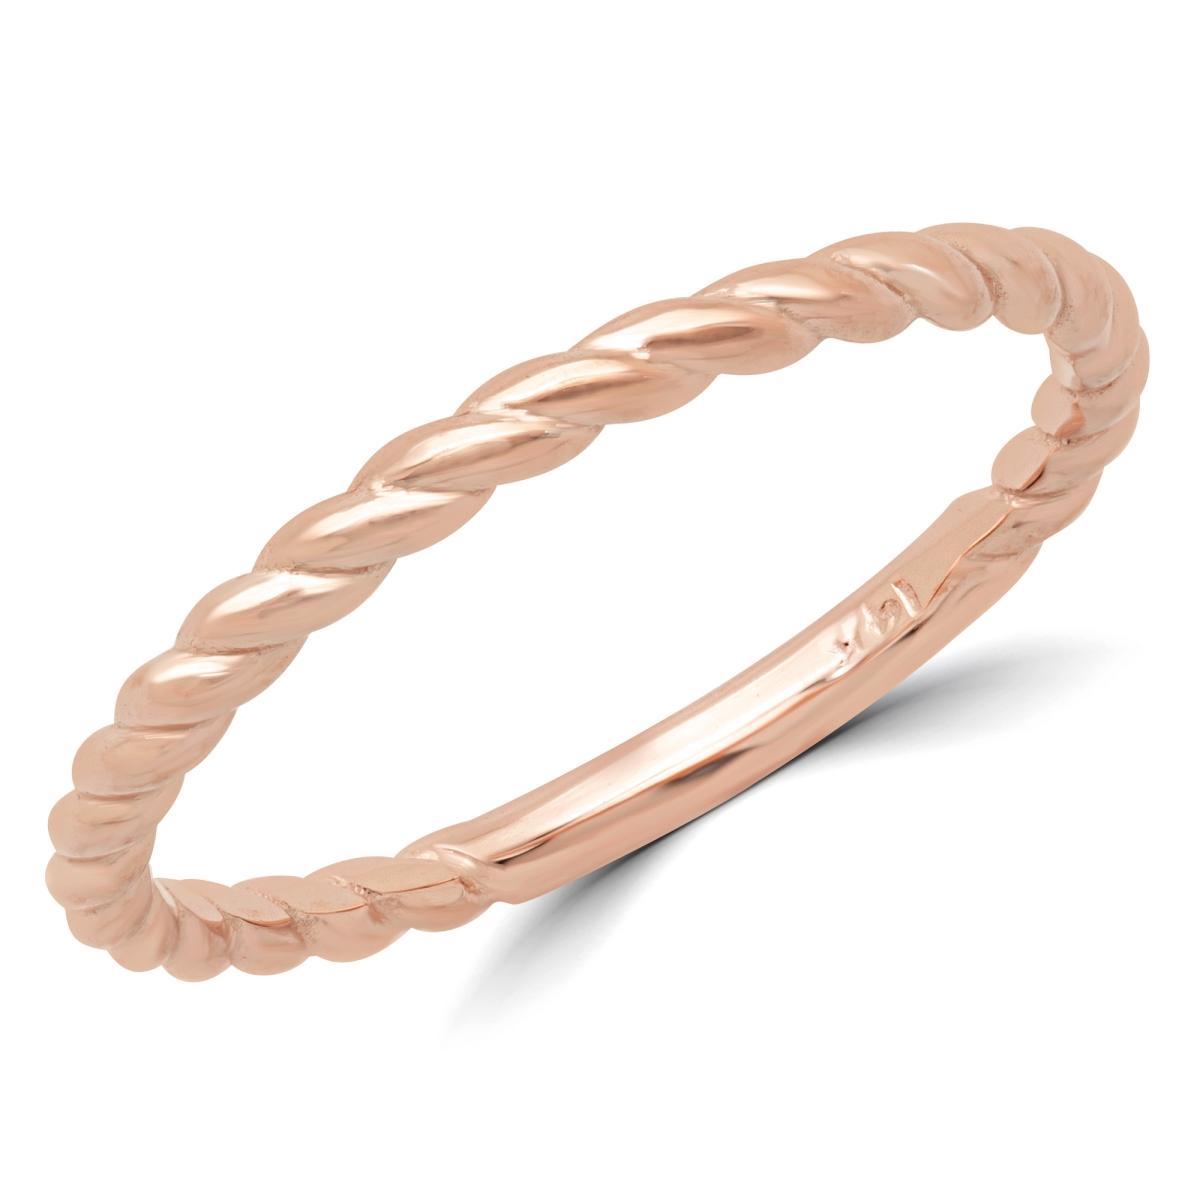 Picture of Majesty Diamonds MD180603-4 Braided Rope Classic Wedding Band Ring in 14K Rose Gold - Size 4